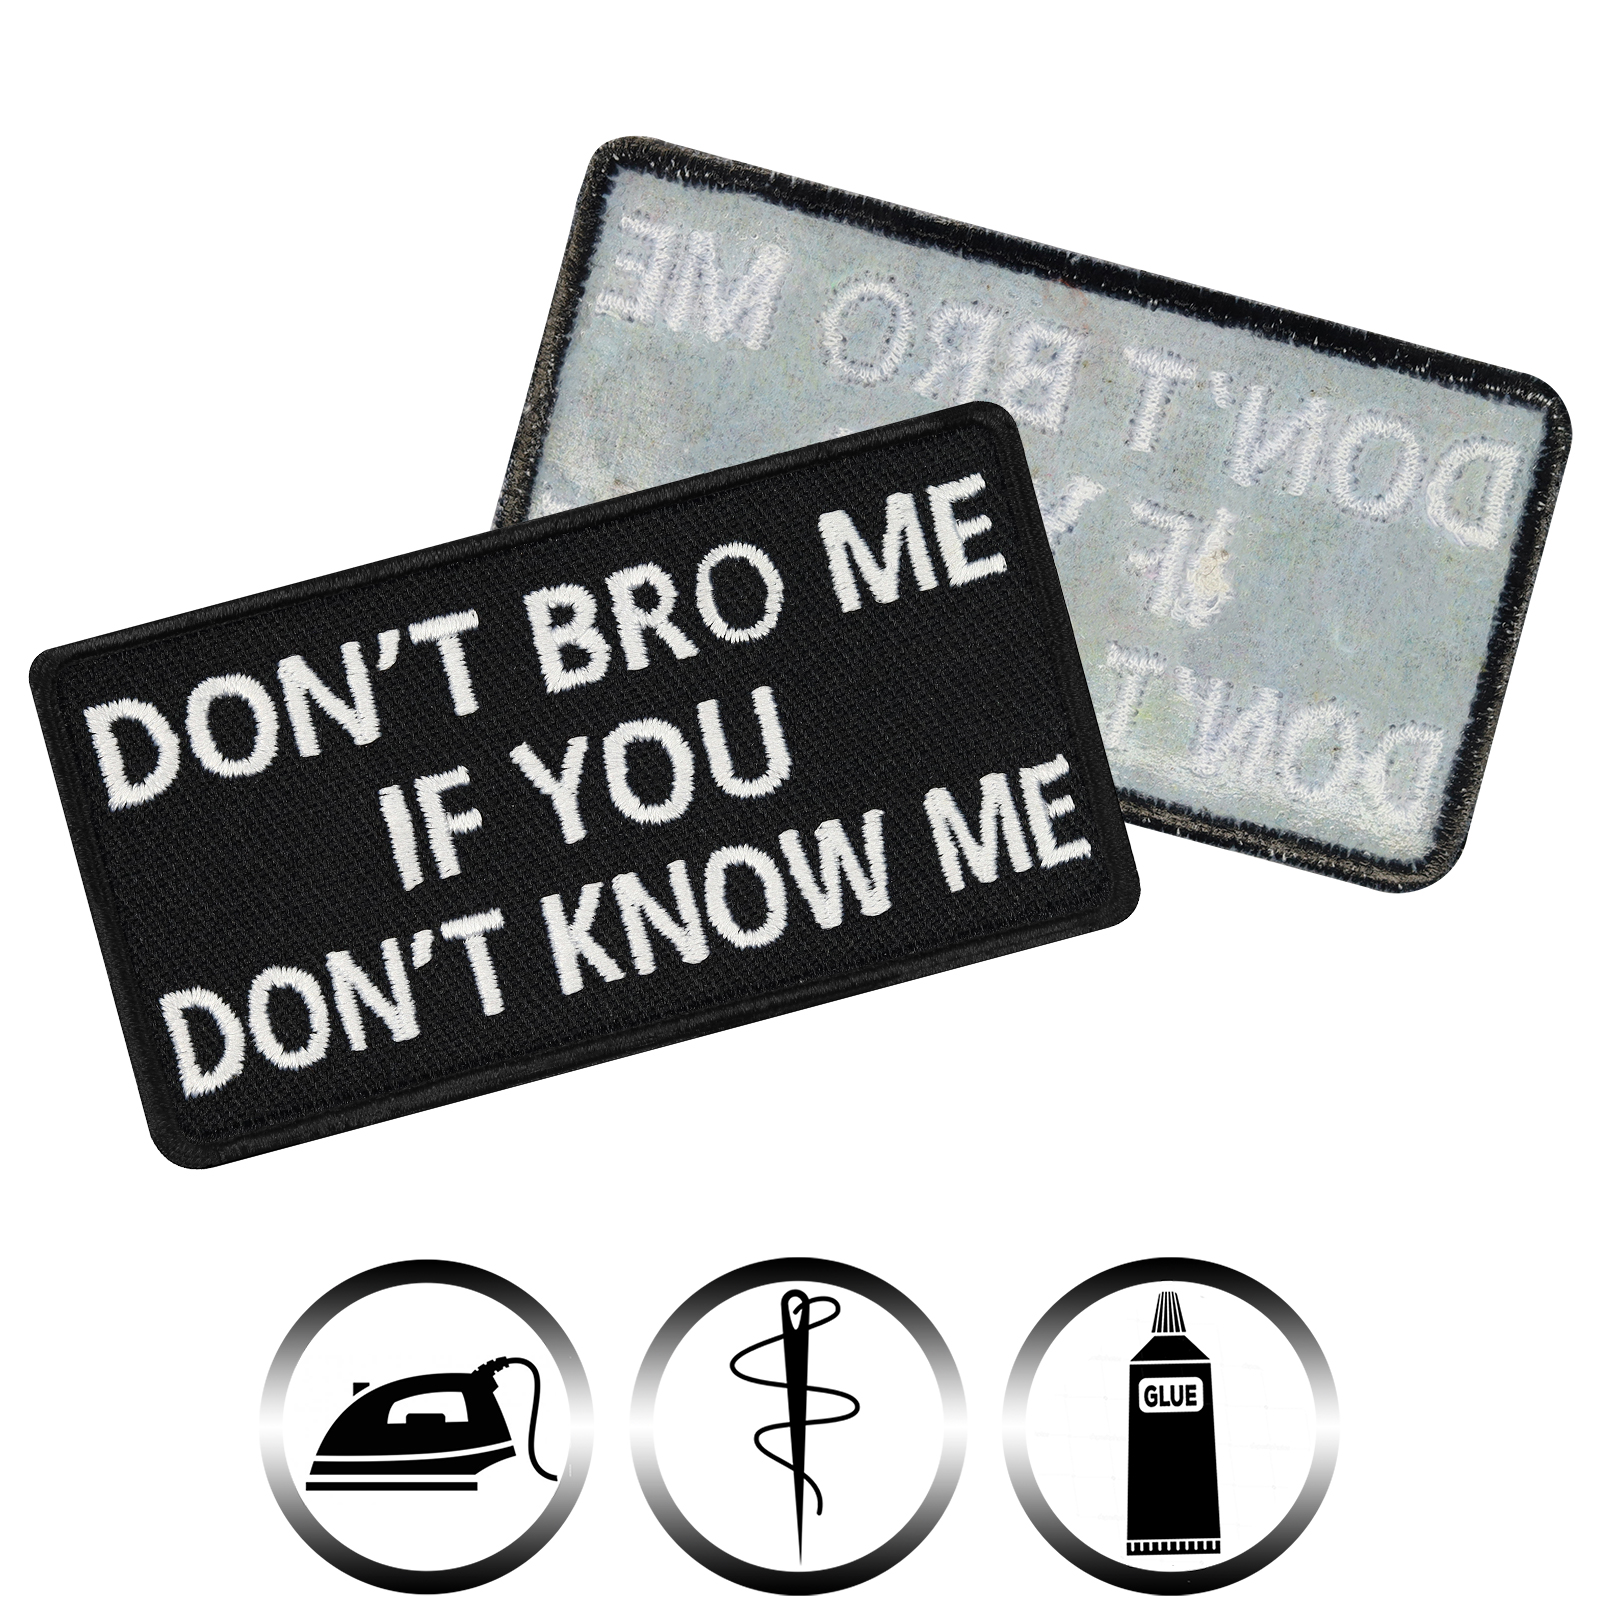 Don't bro me if you don't know me - Patch